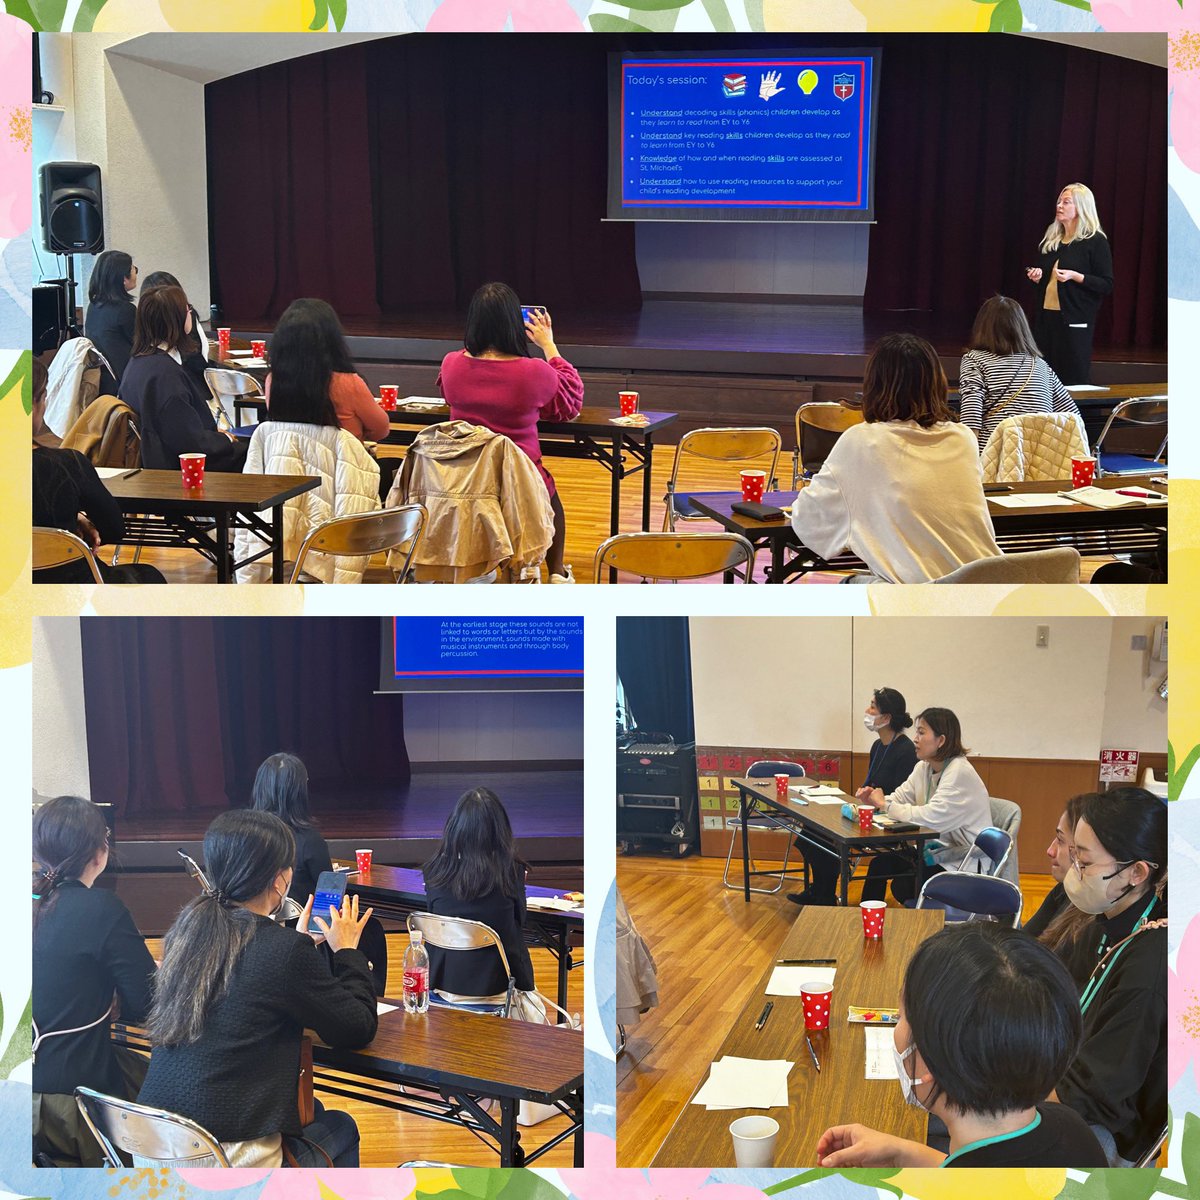 Delighted to welcome parents to today #smiskobe Workshop. Today we are sharing strategies to support young readers #collaboration #community #readingcommunity @The_IPC @The_IEYC